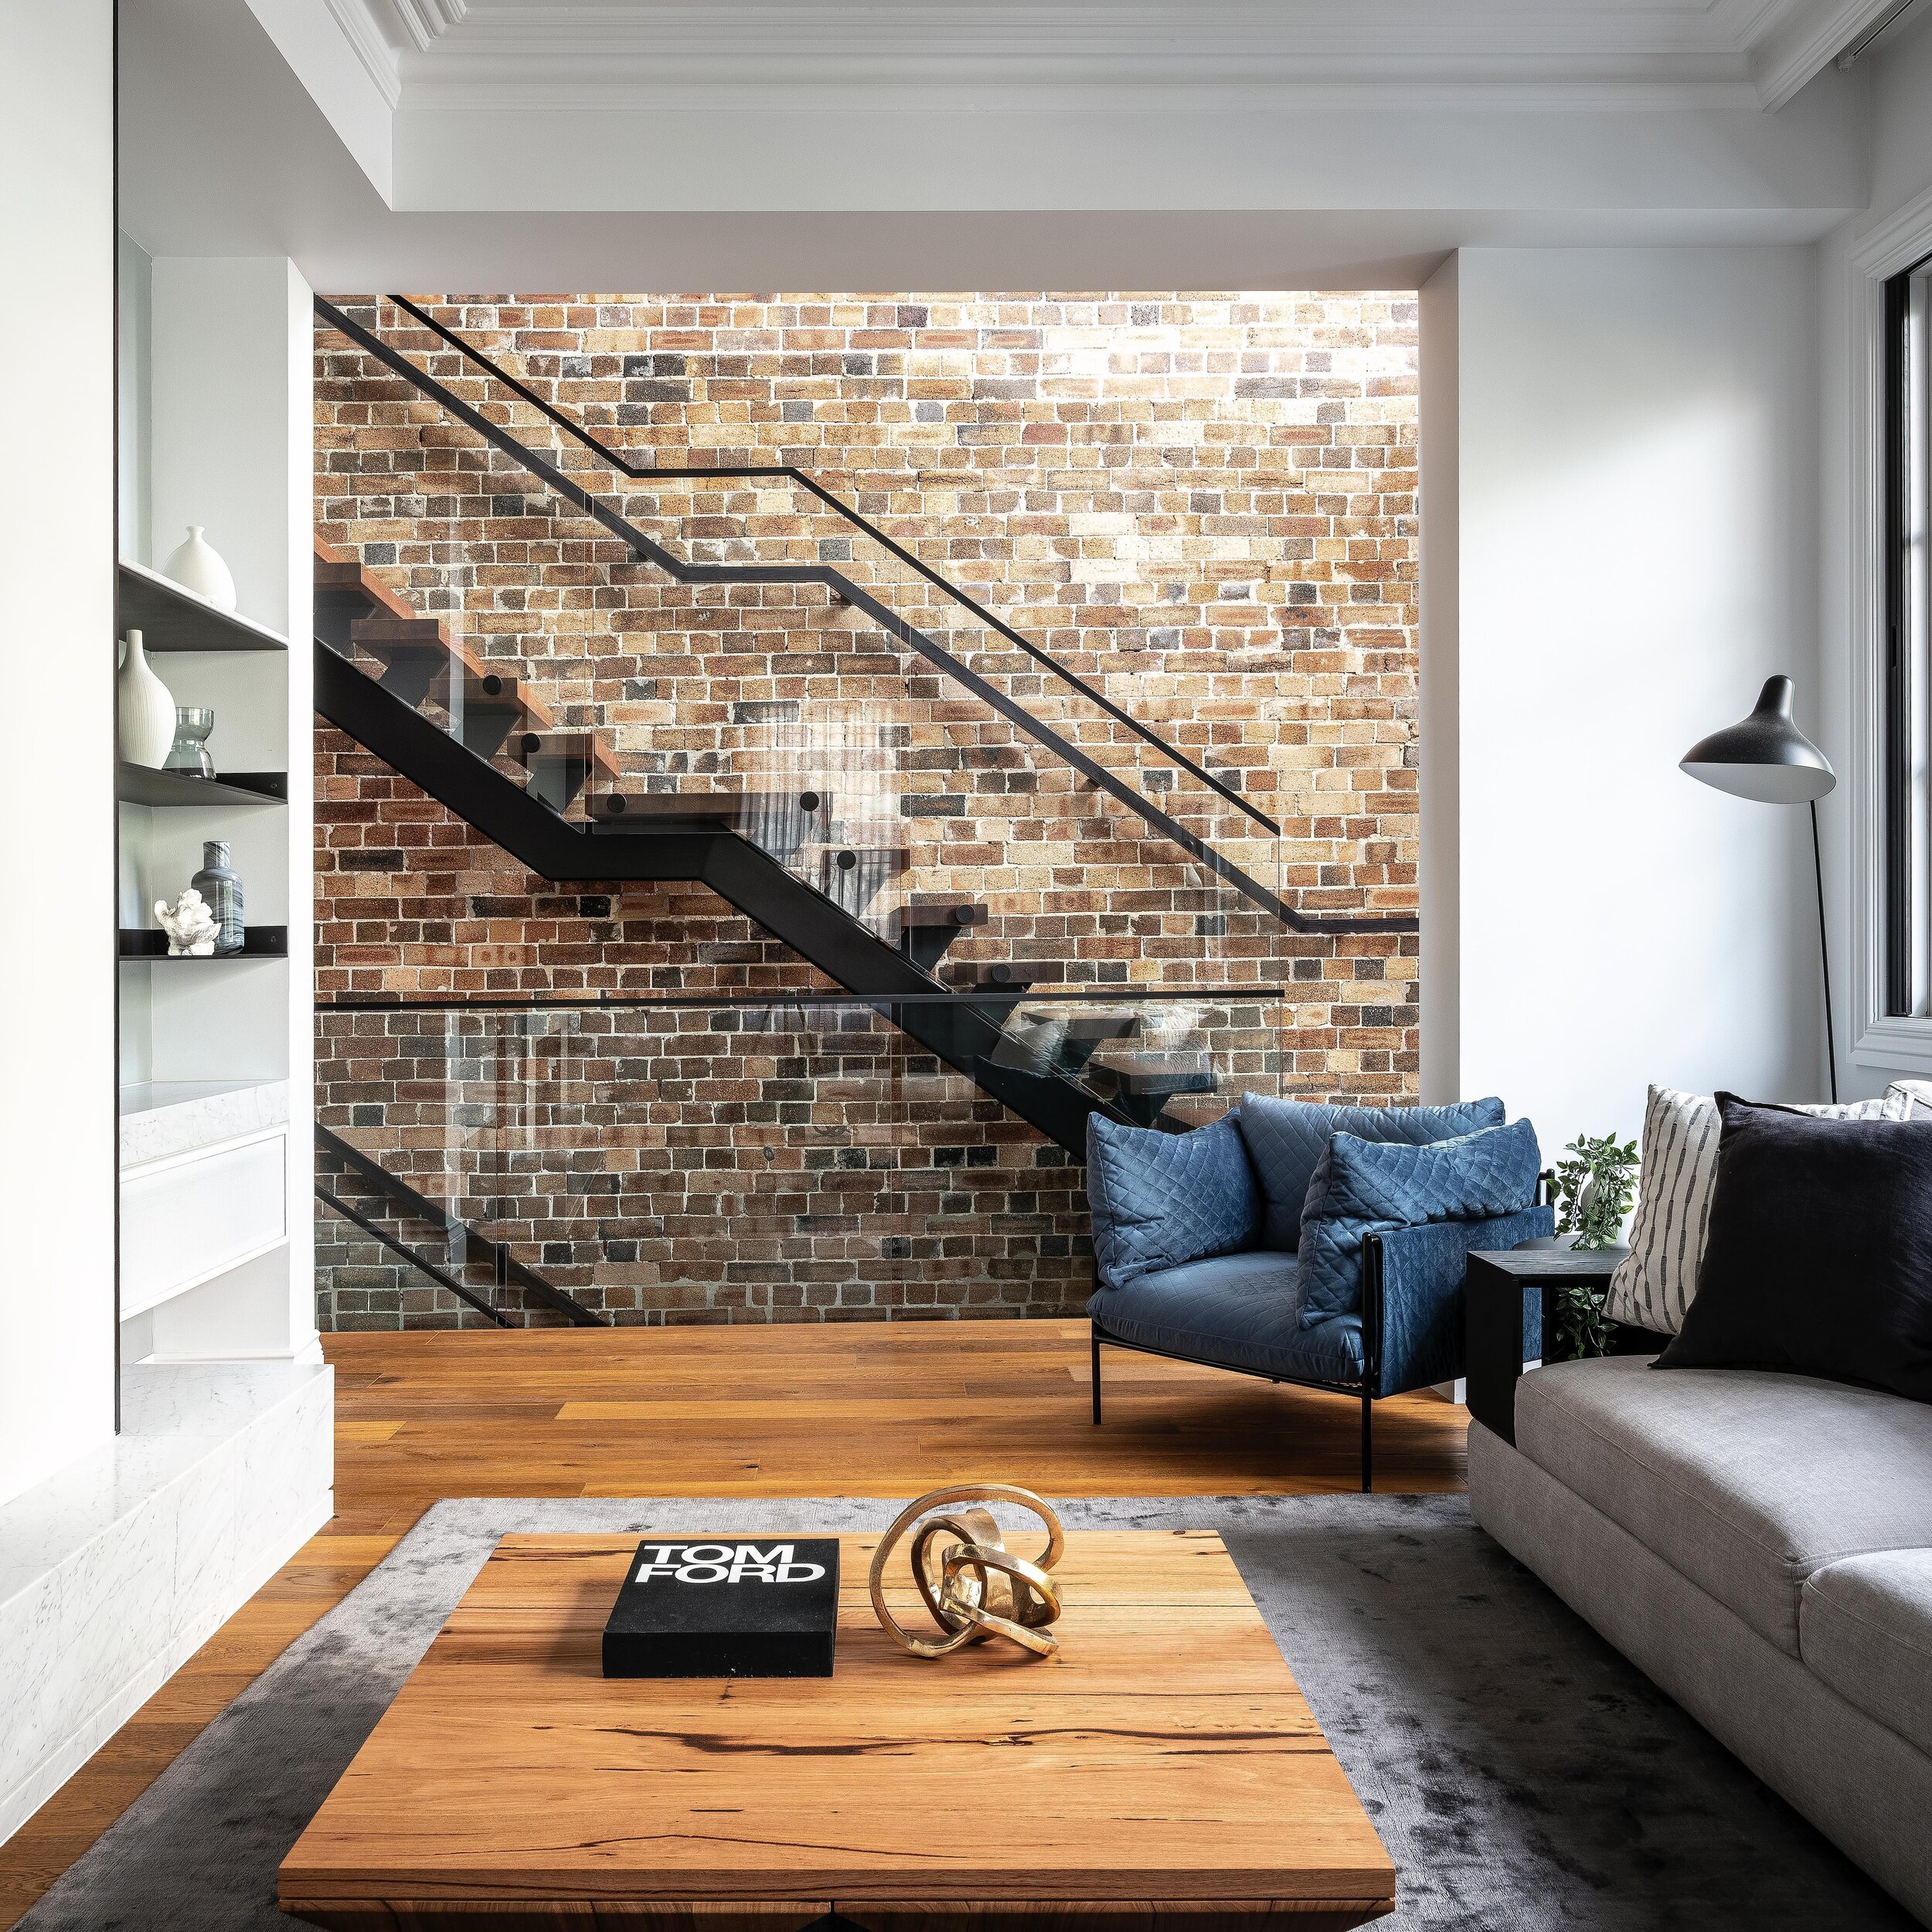 RILEY &bull; We knew this original brickwork had to remain as a feature piece to capture the history of the building. It acts as a warm textural backdrop to the contemporary living space #InnovateInteriors